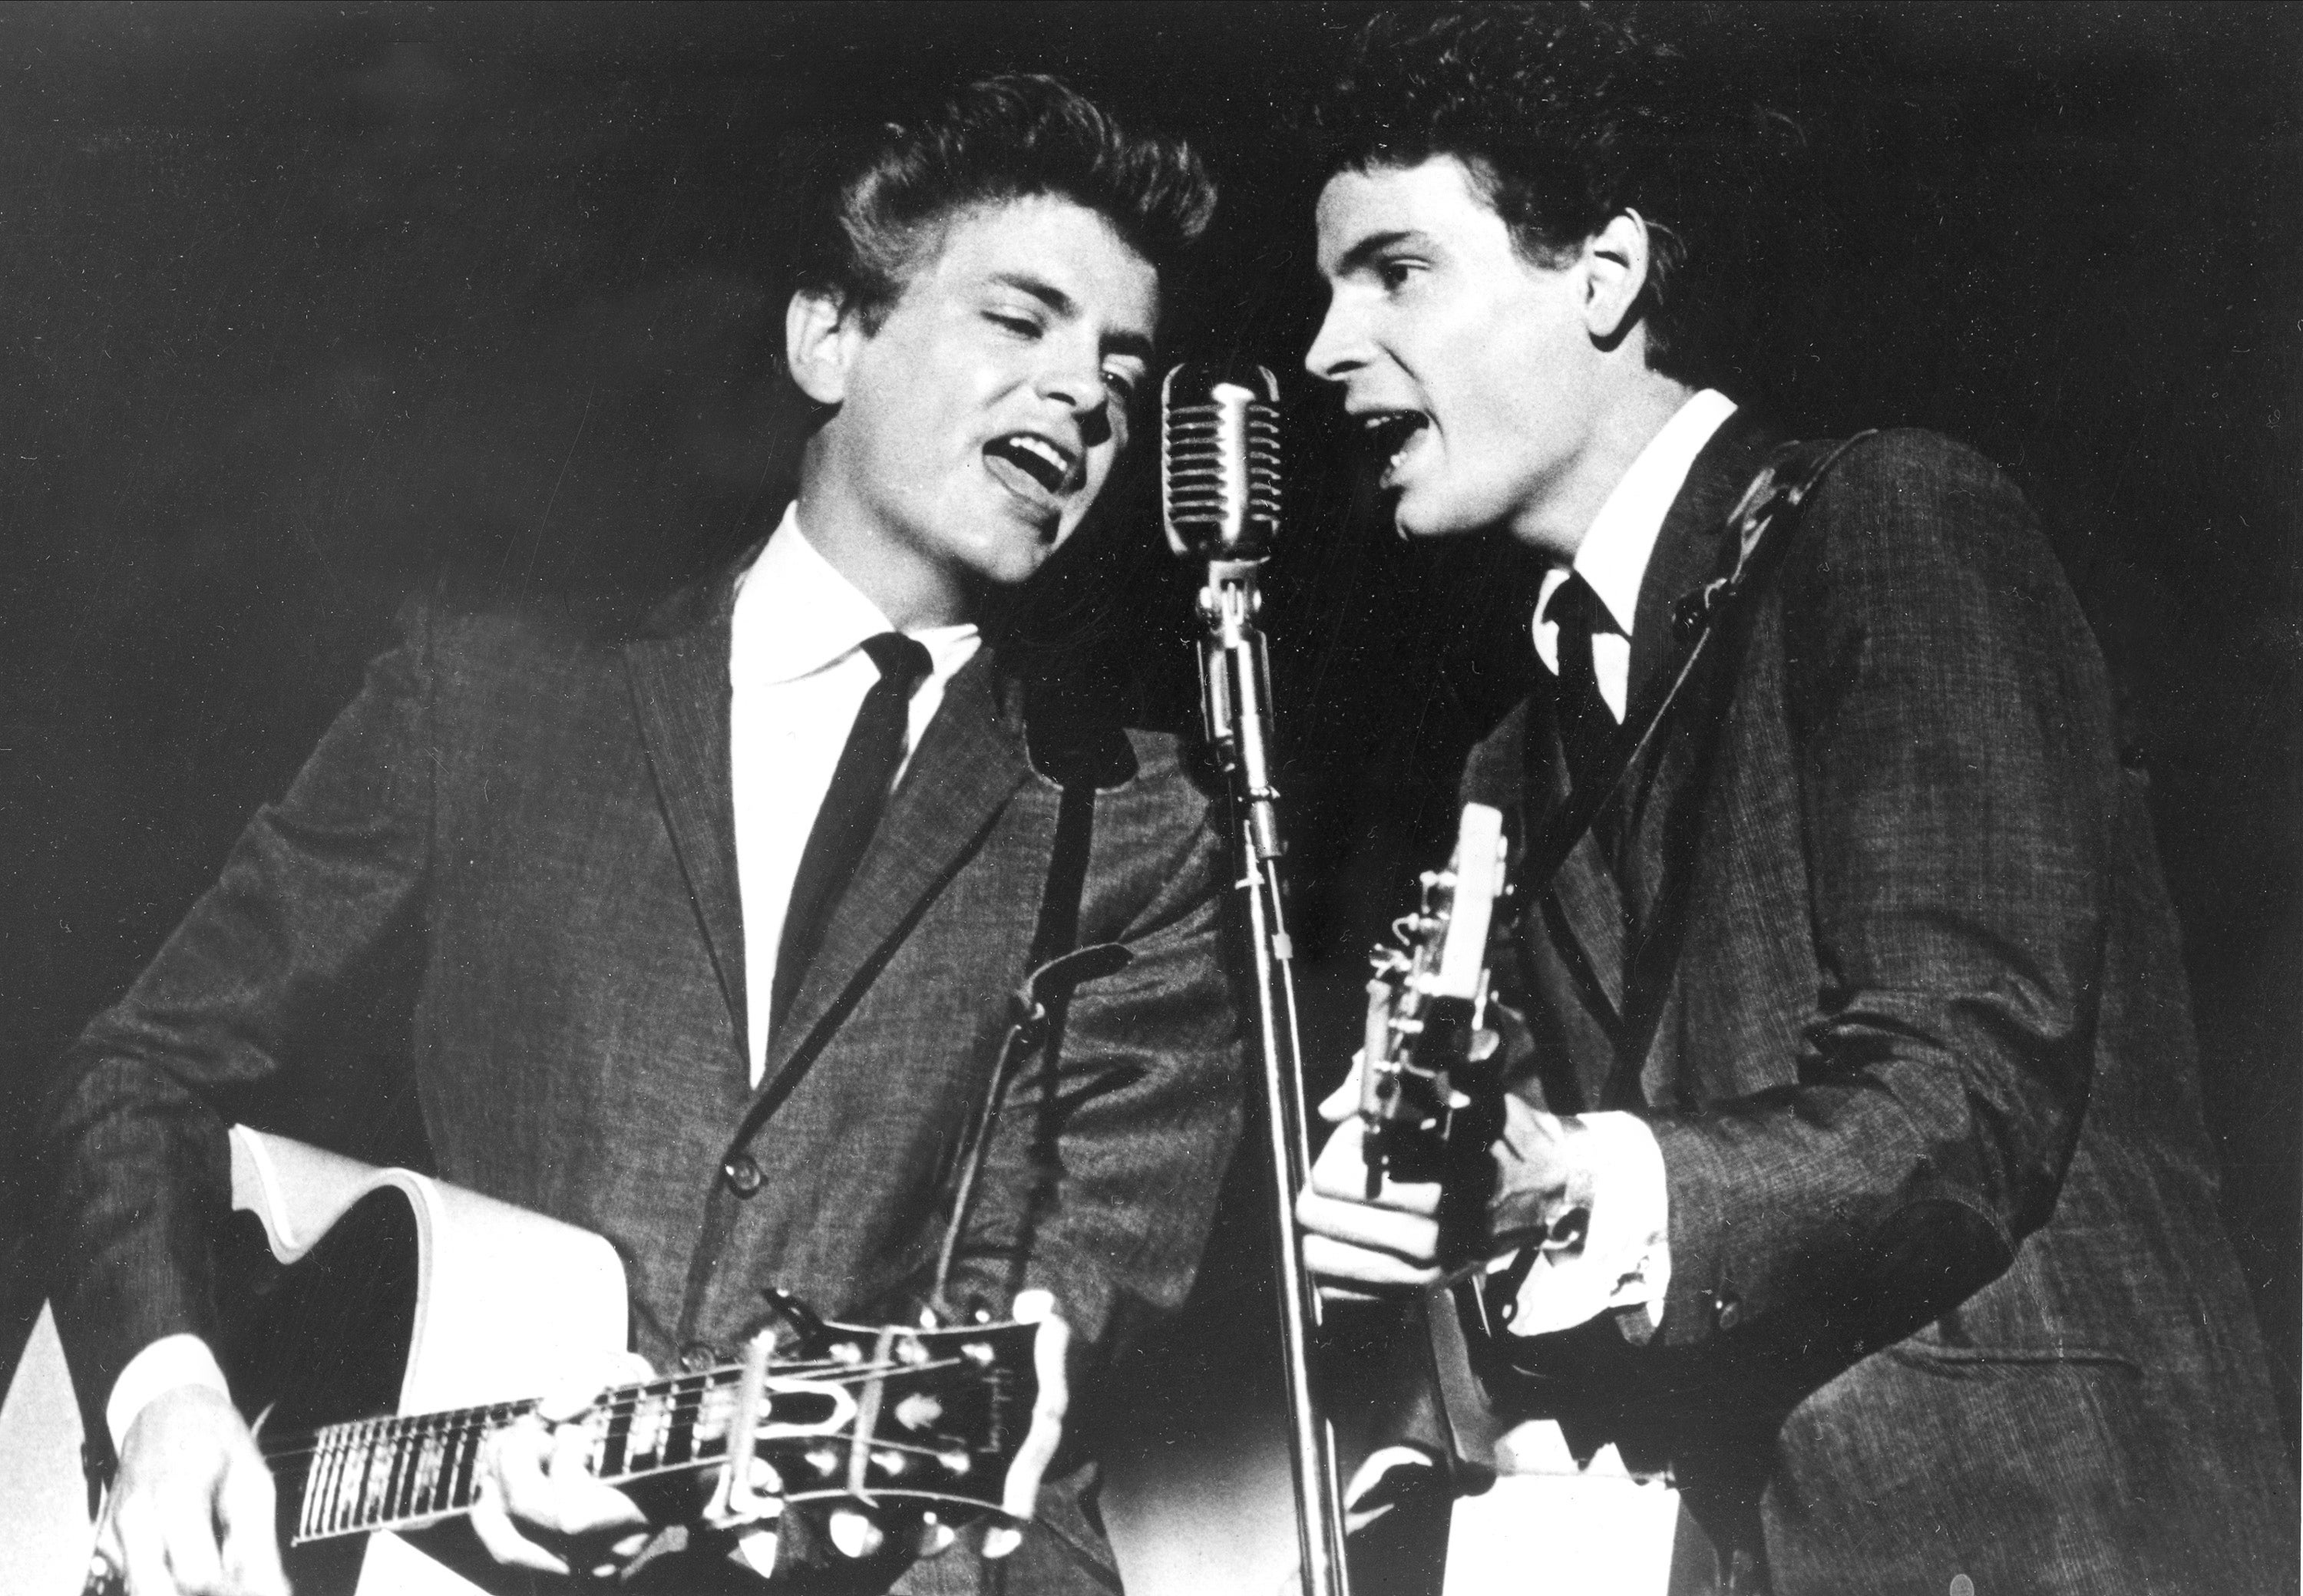 <p>The Everly Brothers, Phil, left, and Don, perform on stage in 1964 </p>